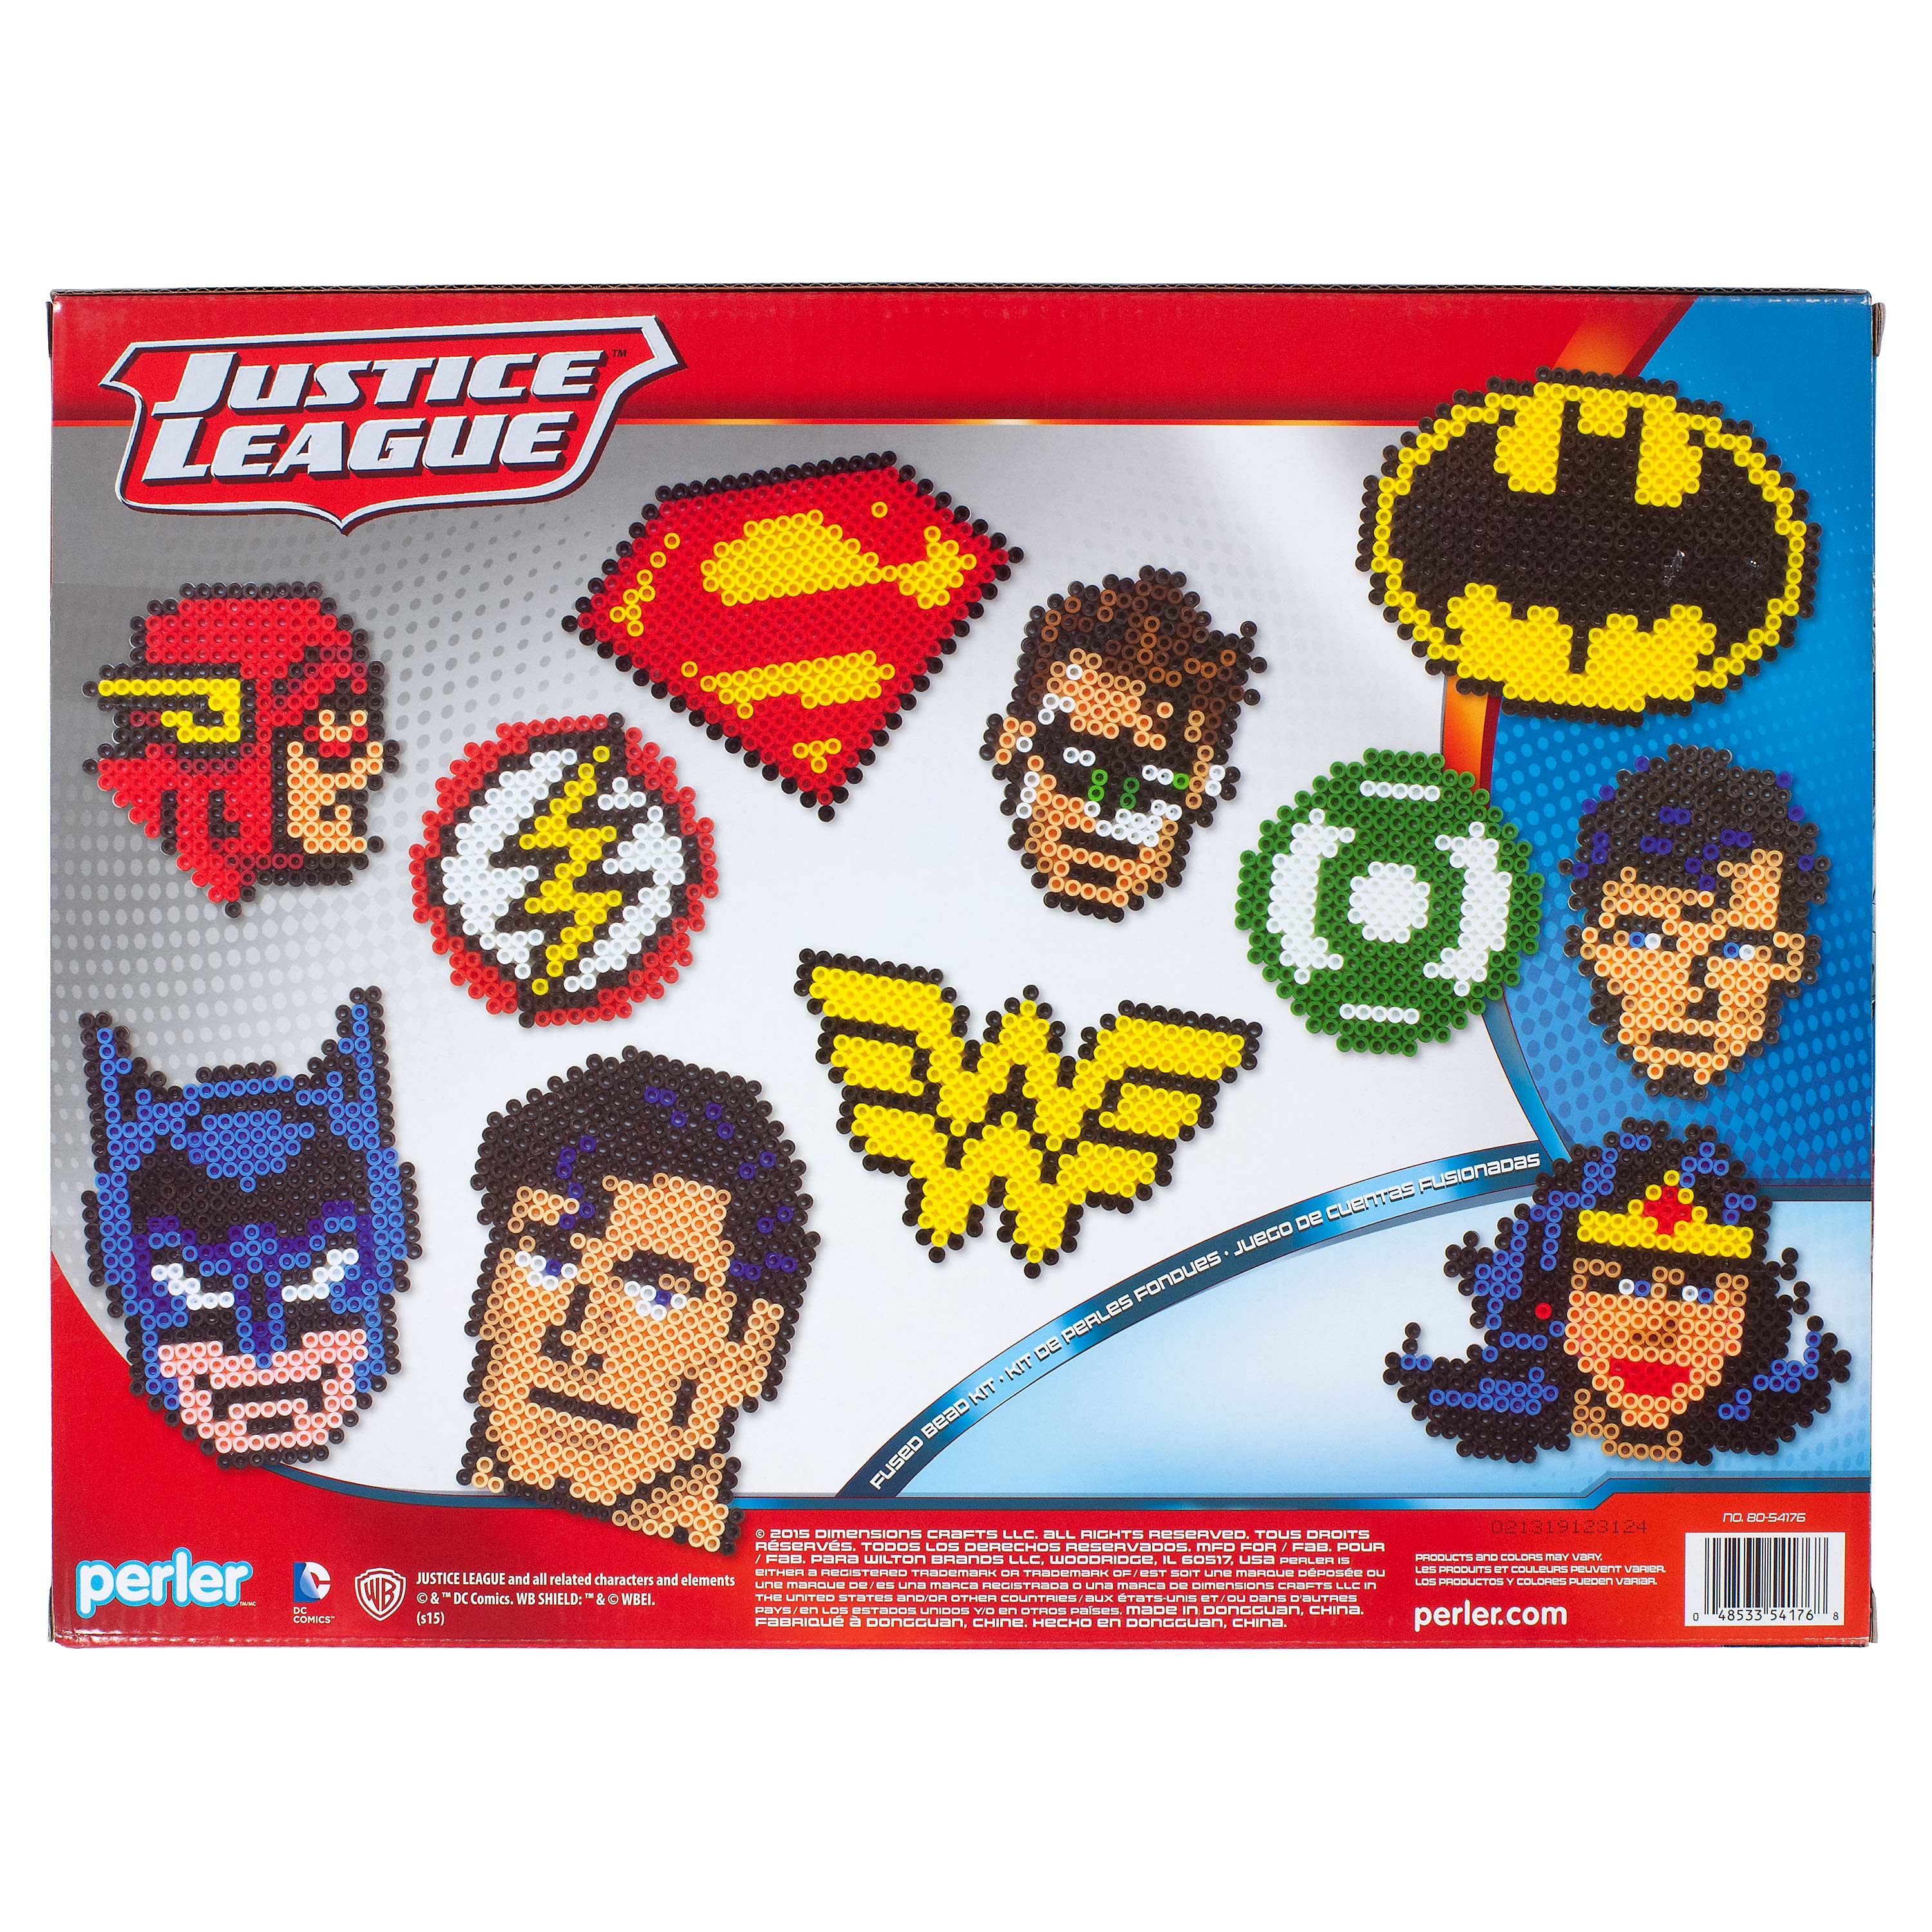 Perler Fused Bead Kit Deluxe Box Justice League, Ages 6 & up - image 3 of 4